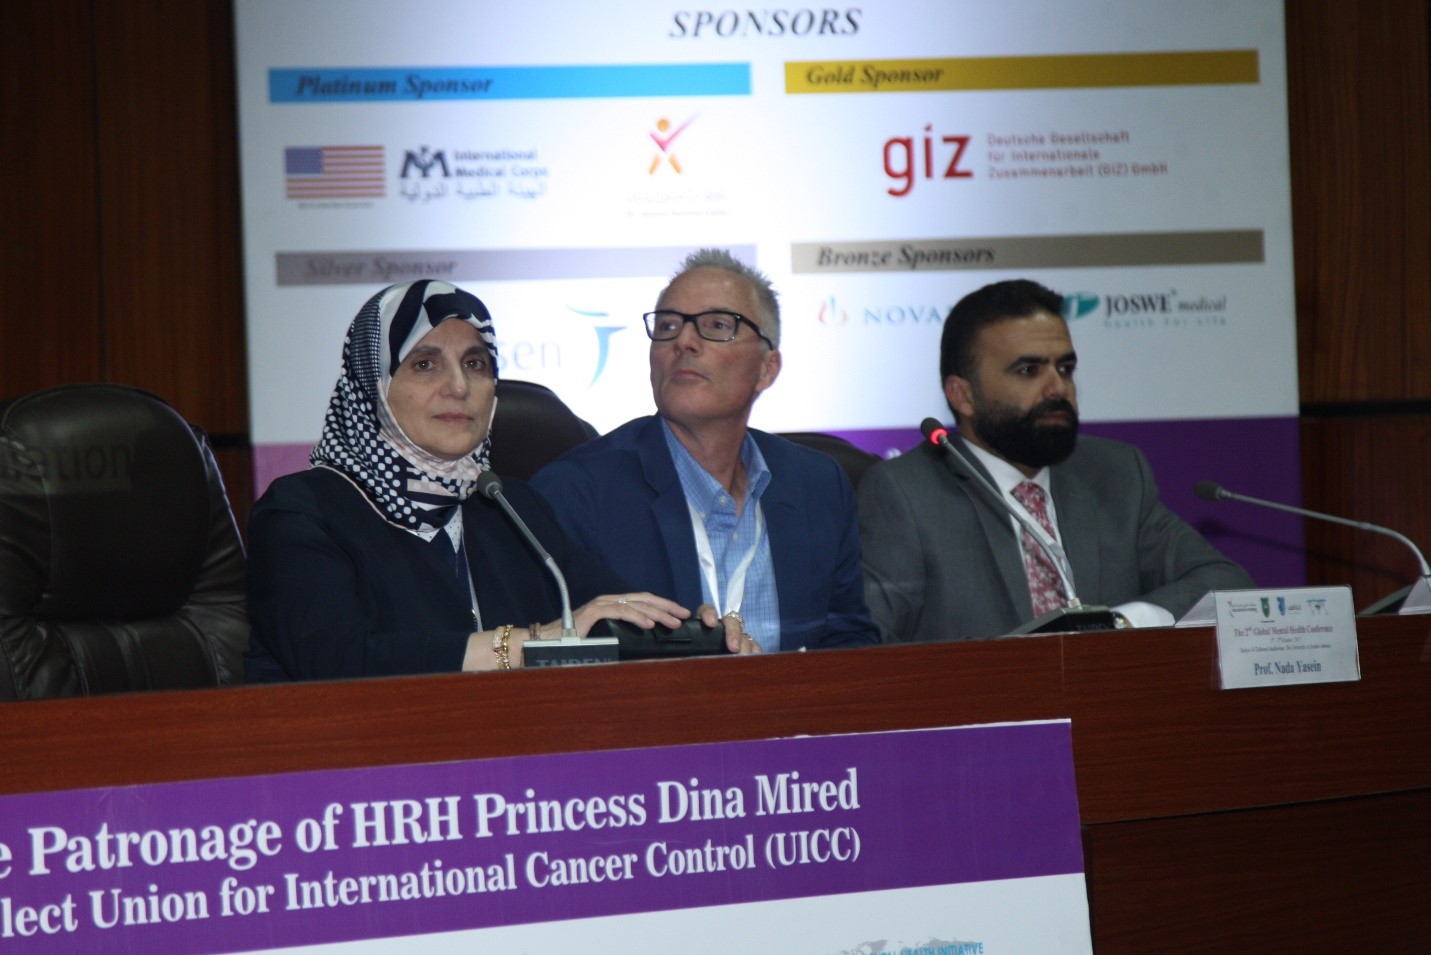 Dr. Nada Yasin from Jordan University, Dr. Edwards from GMH, and Dr. Bawaneh from International Medical Corps as part of a panel at the 2017 conference